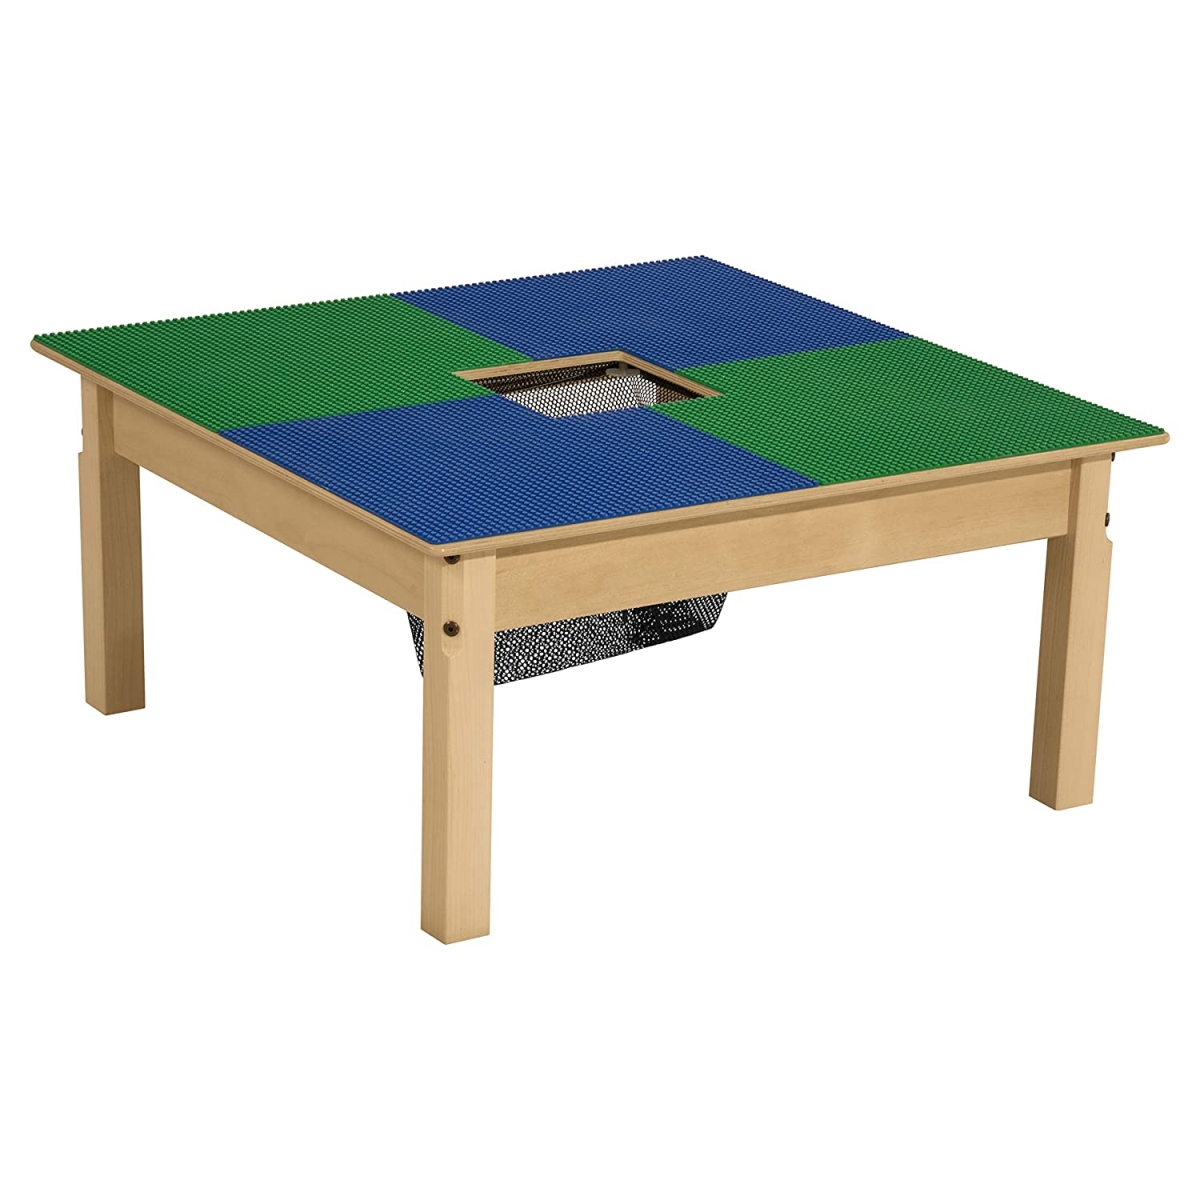 Tp3131sgna1829-bg 18-29 In. Lego Compatible Table With Adjustable Legs, Blue & Green - Square